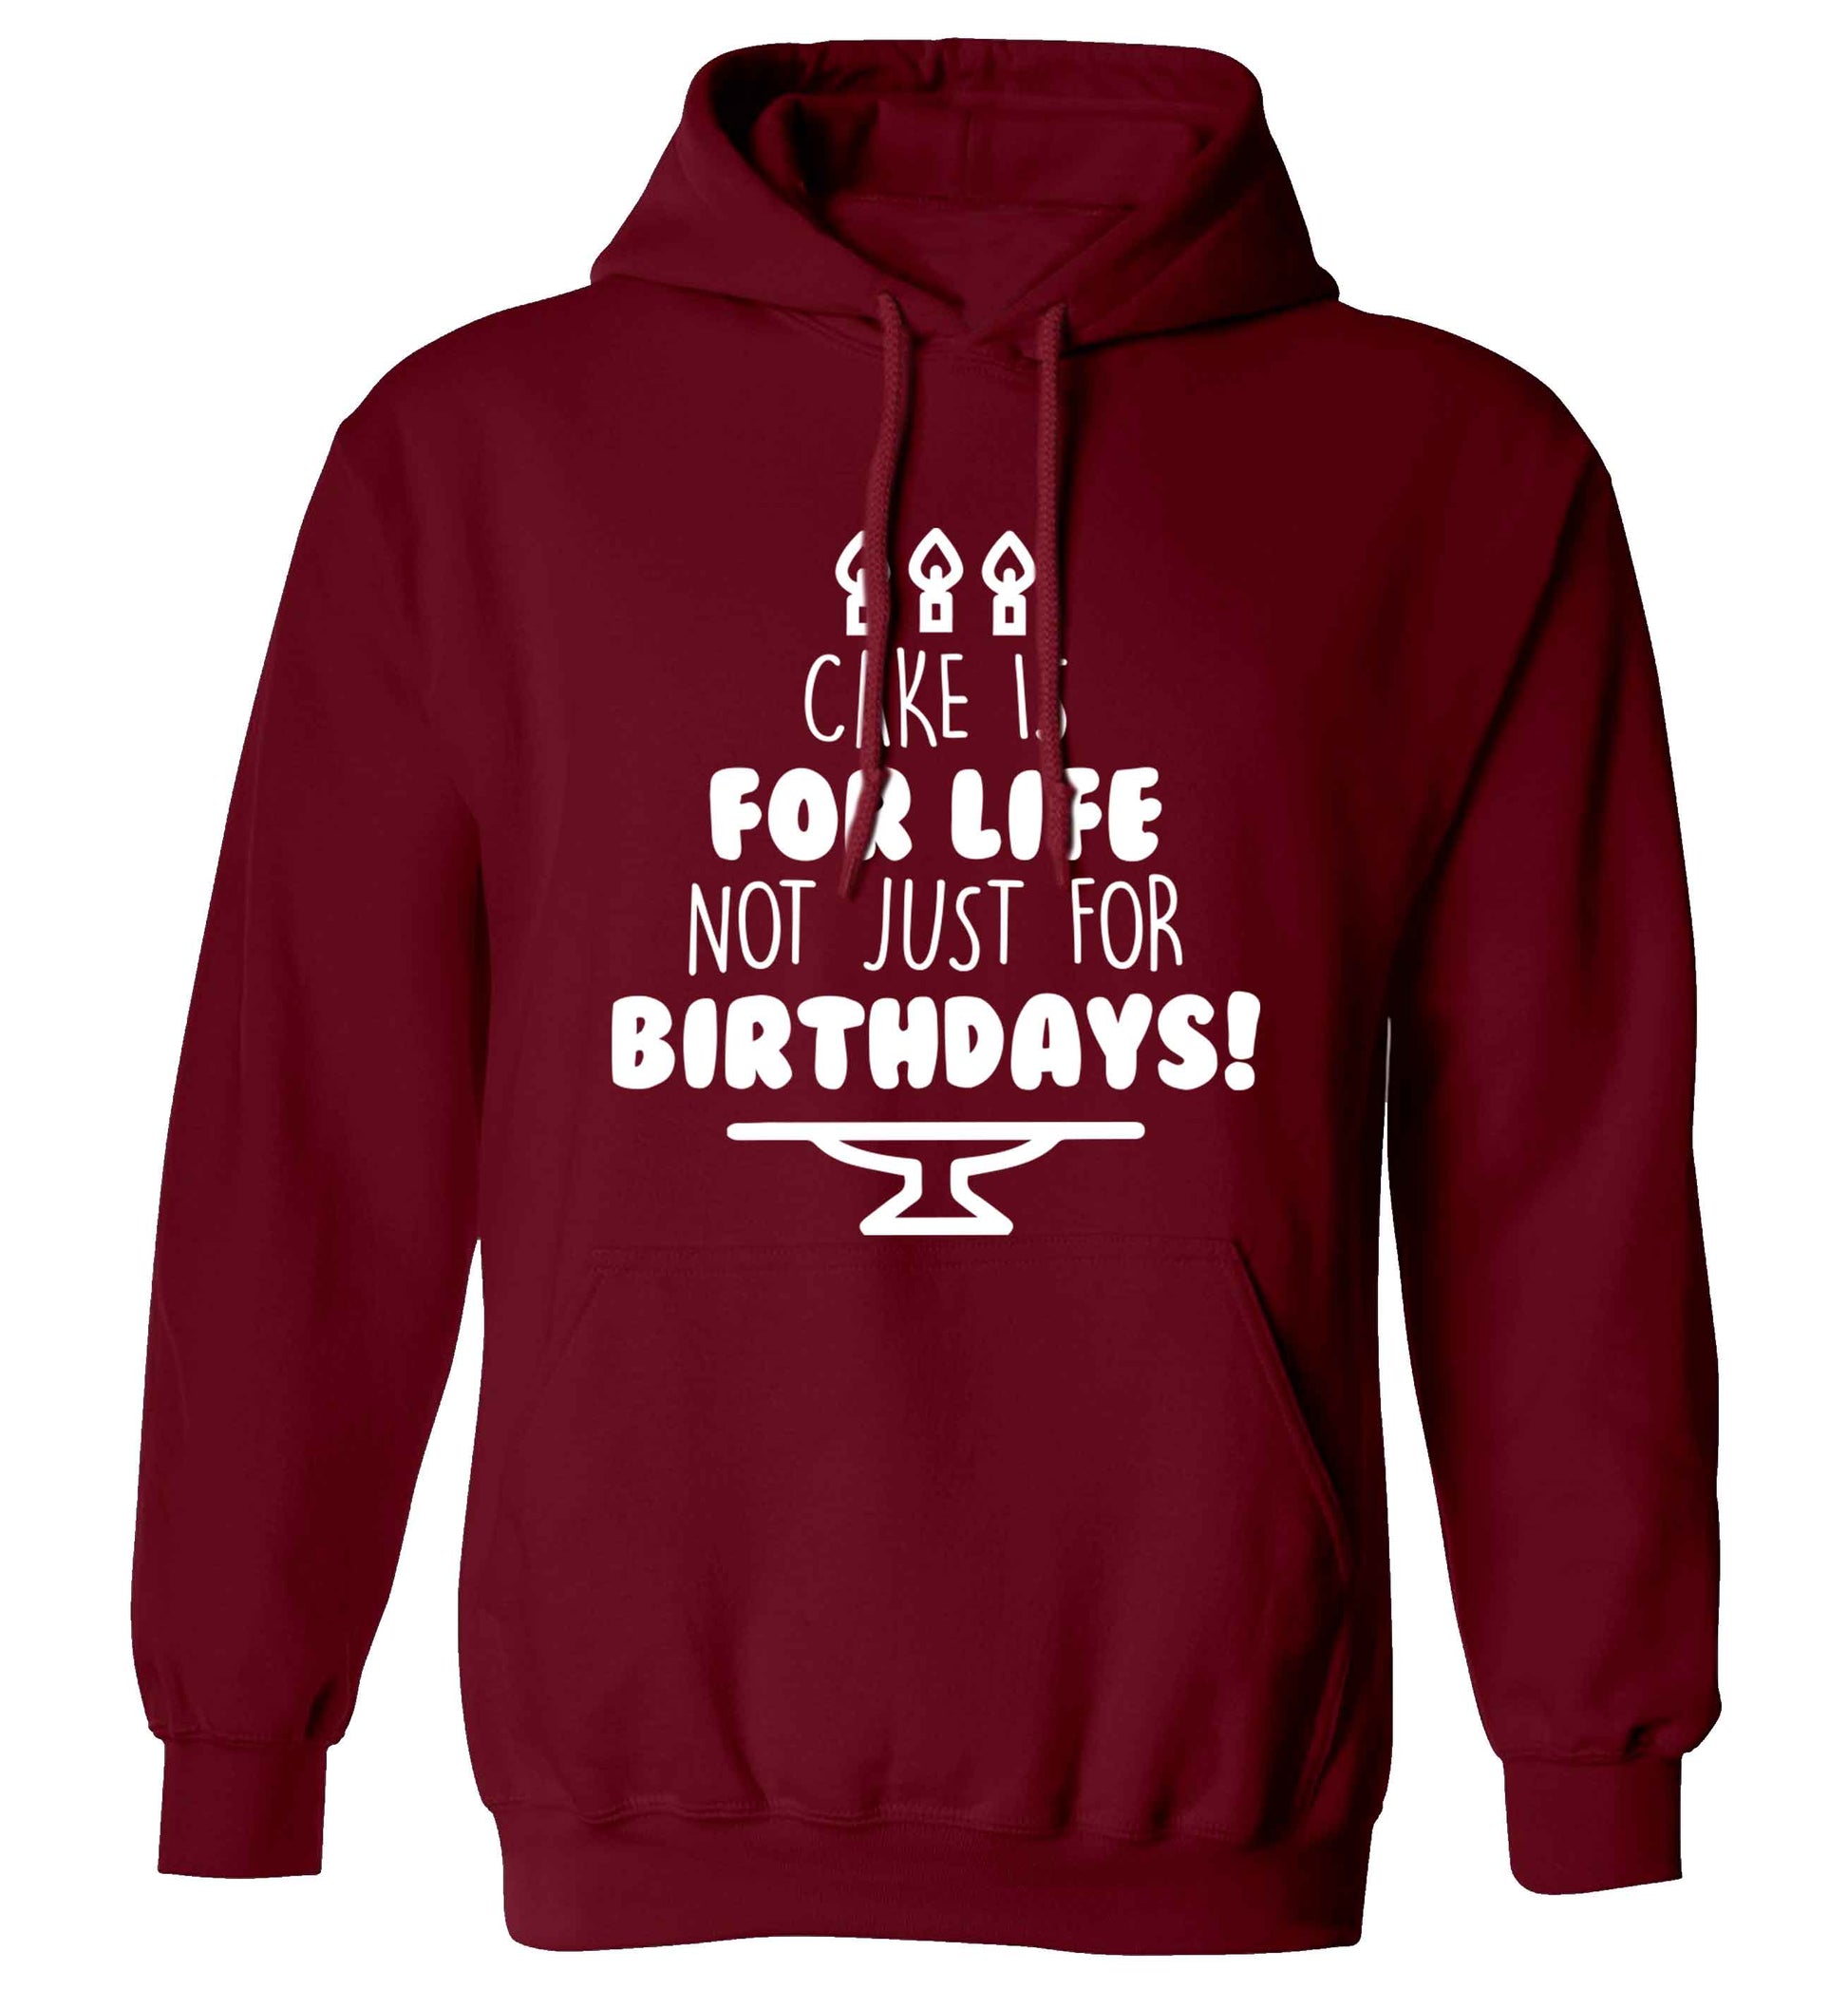 Cake is for life not just for birthdays adults unisex maroon hoodie 2XL